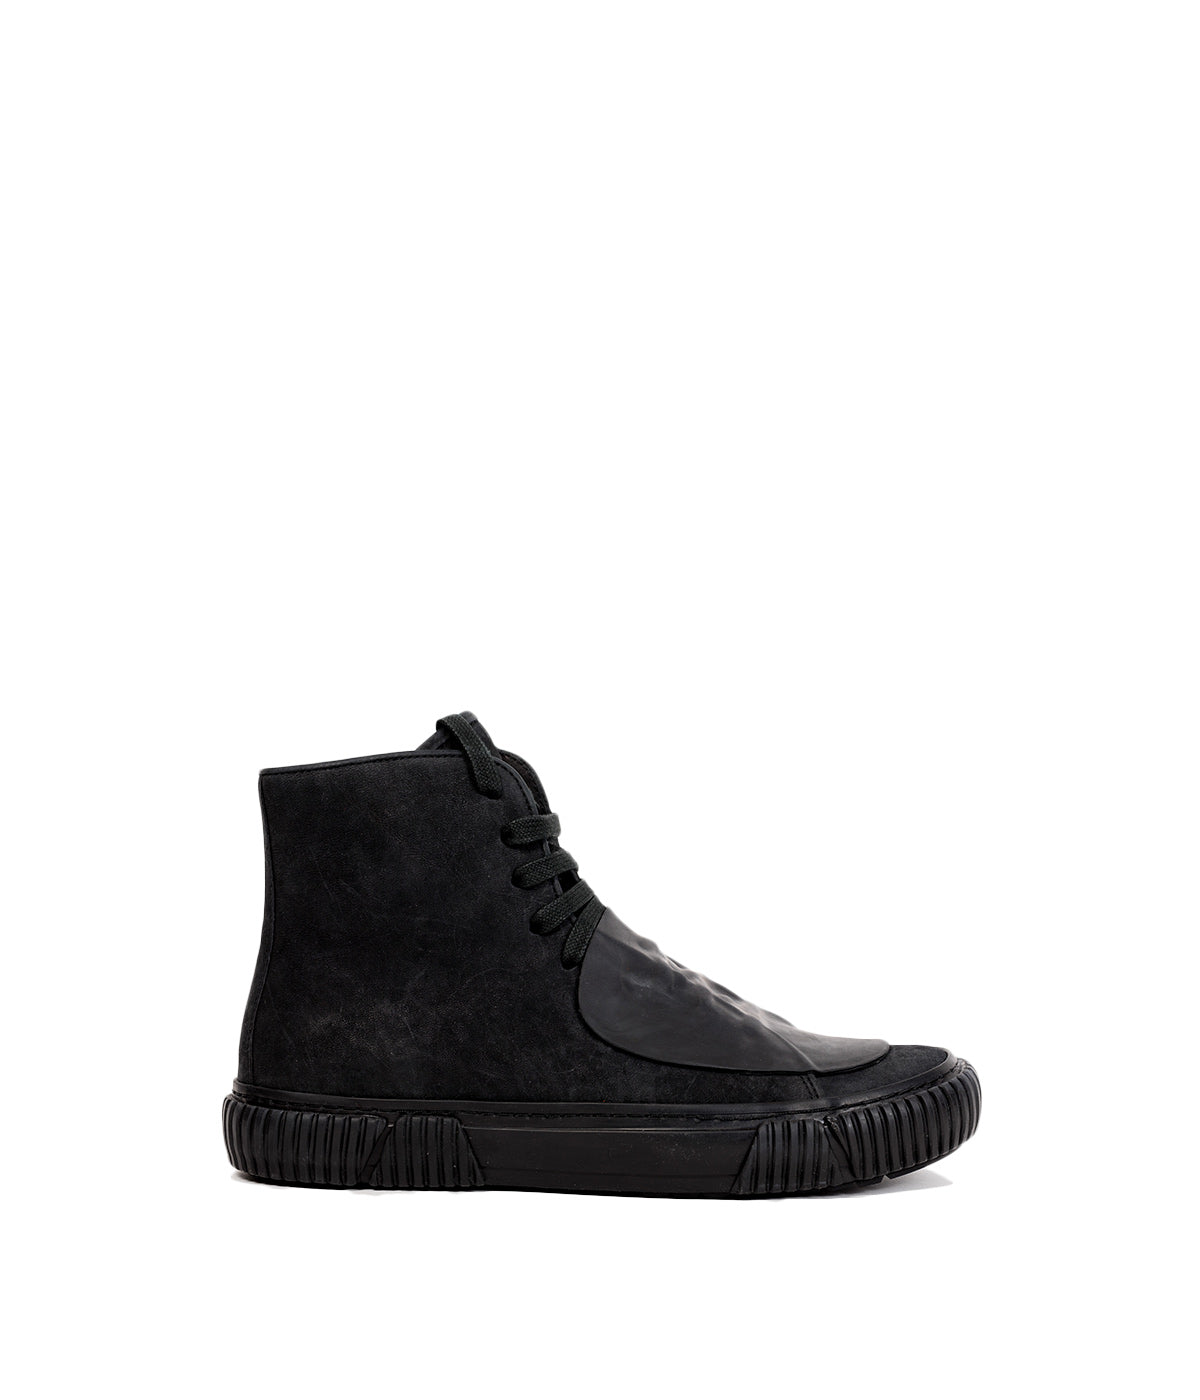 Black High-Top Patch Sneakers